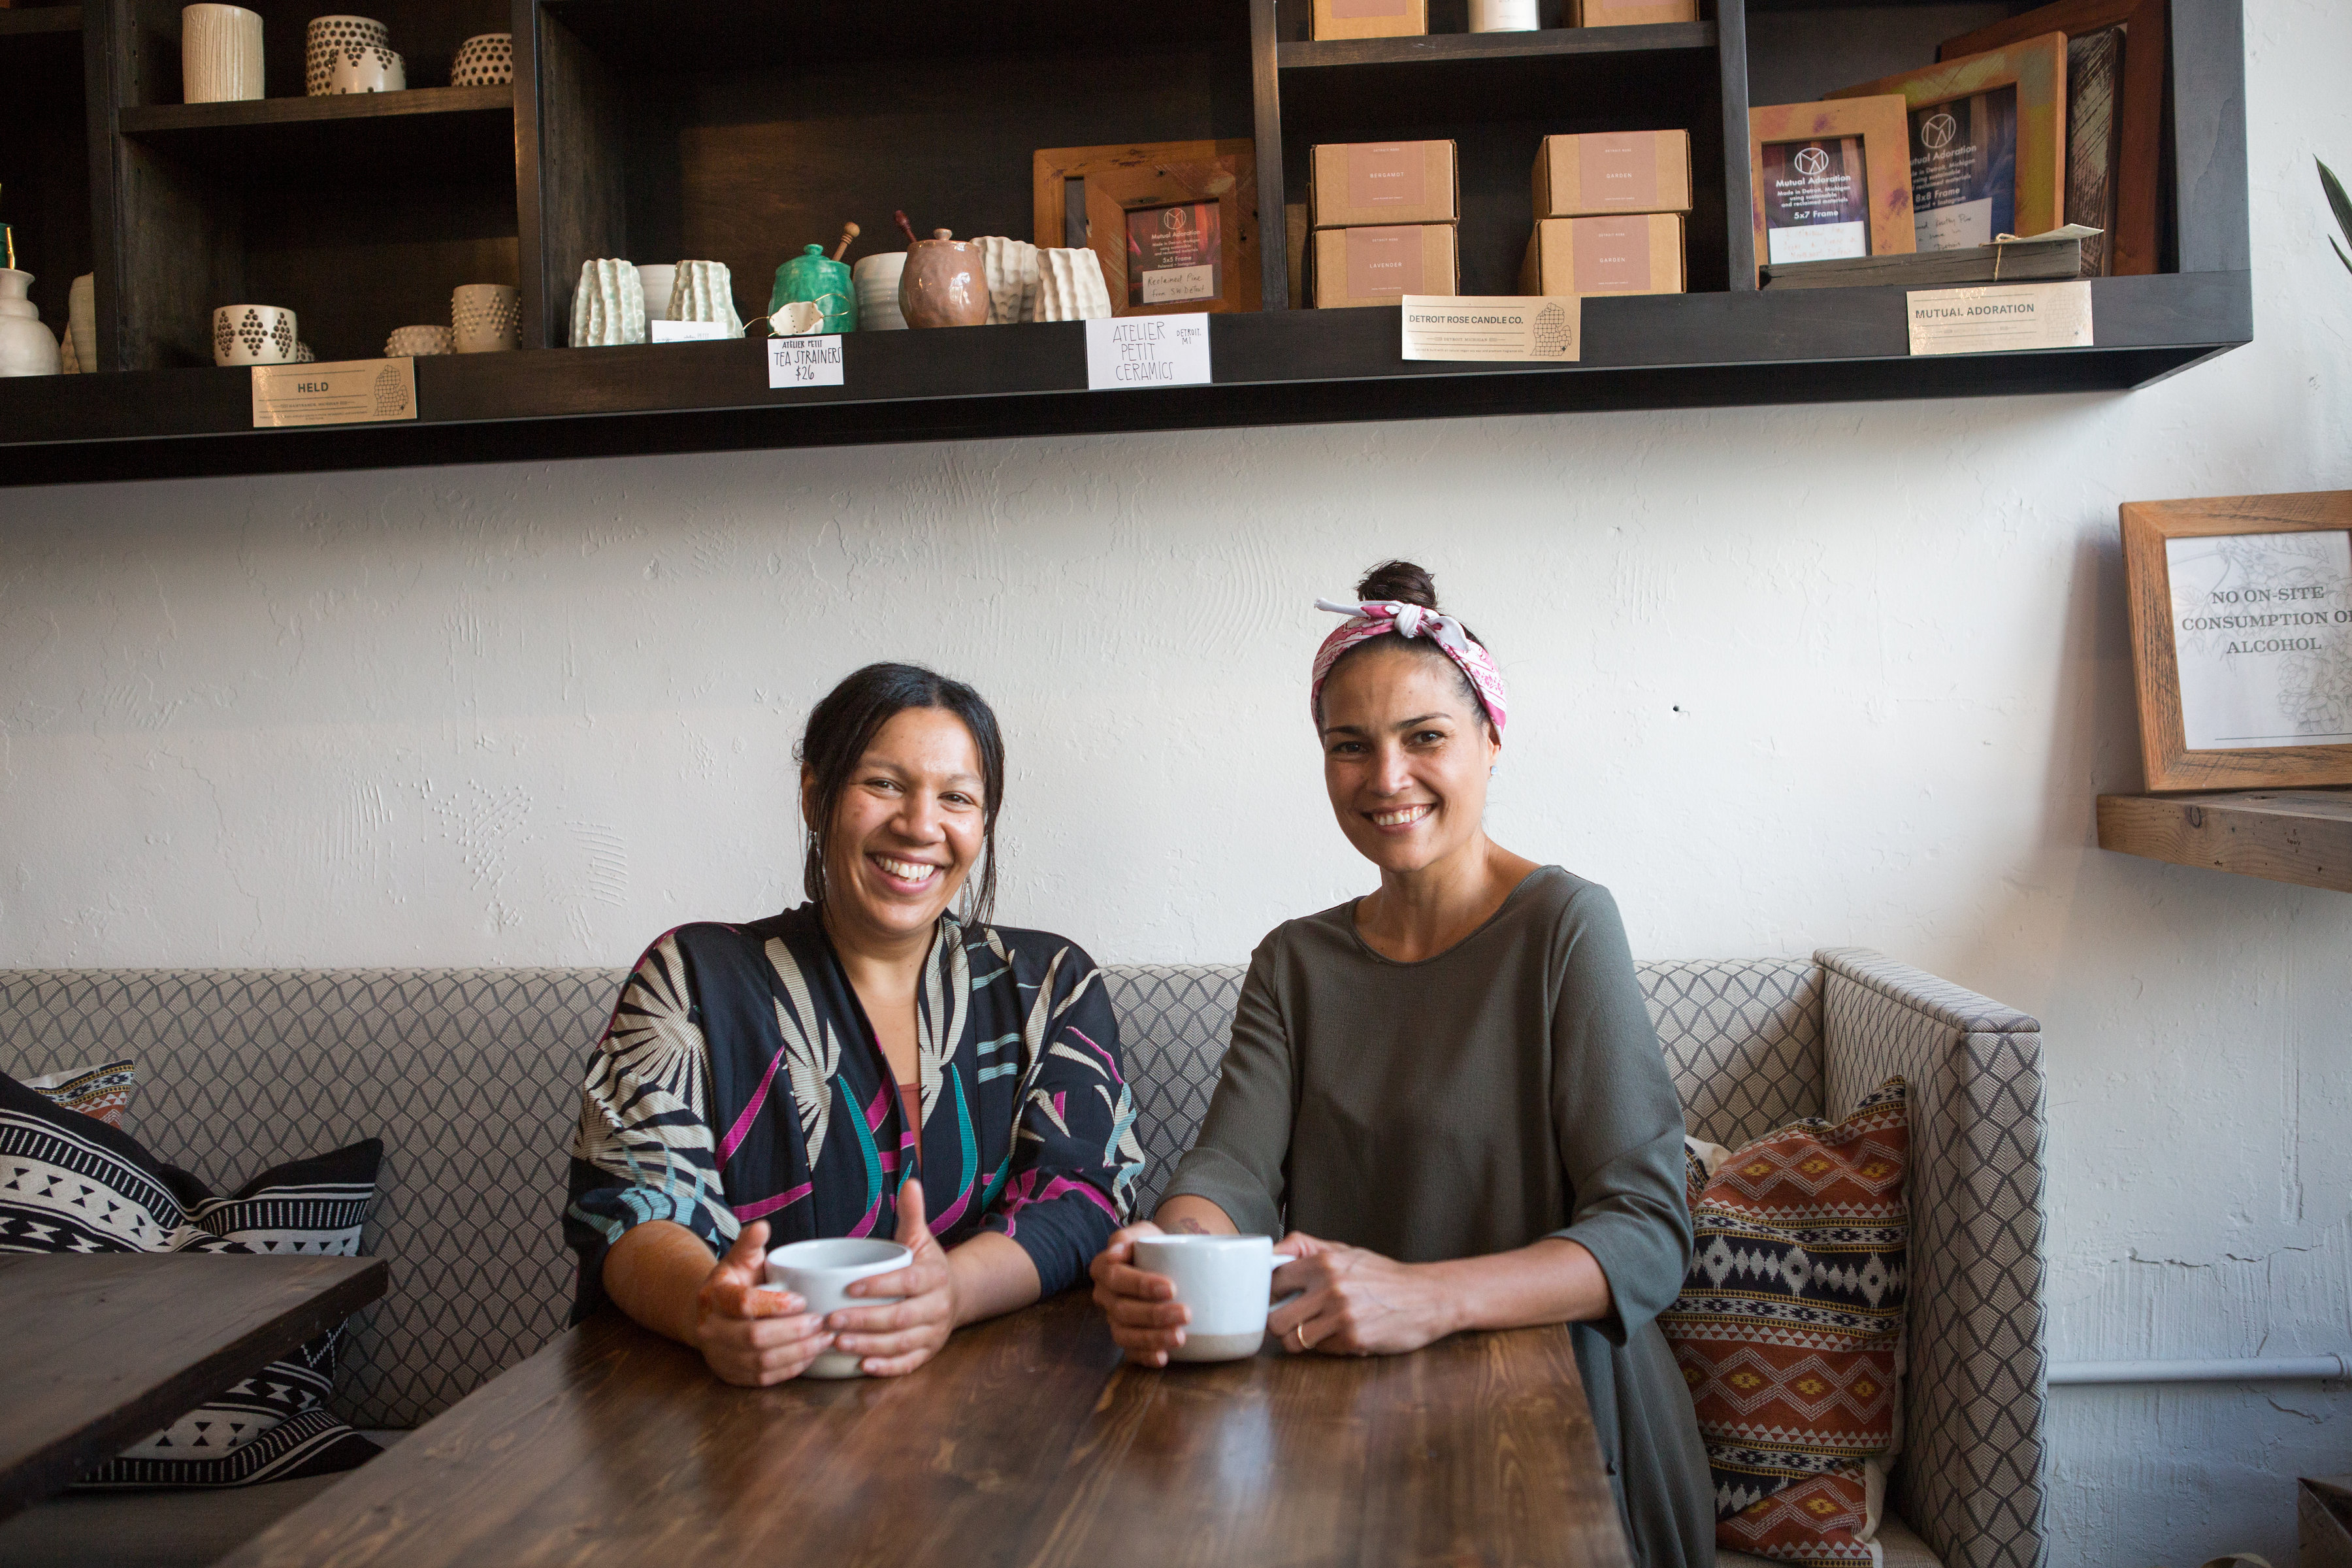 Co-owners Kiki Louya and Rohani Foulkes enjoy a moment of quiet at The Farmer's Hand artisanal cafe and market, located in the historic Corktown district of Detroit.